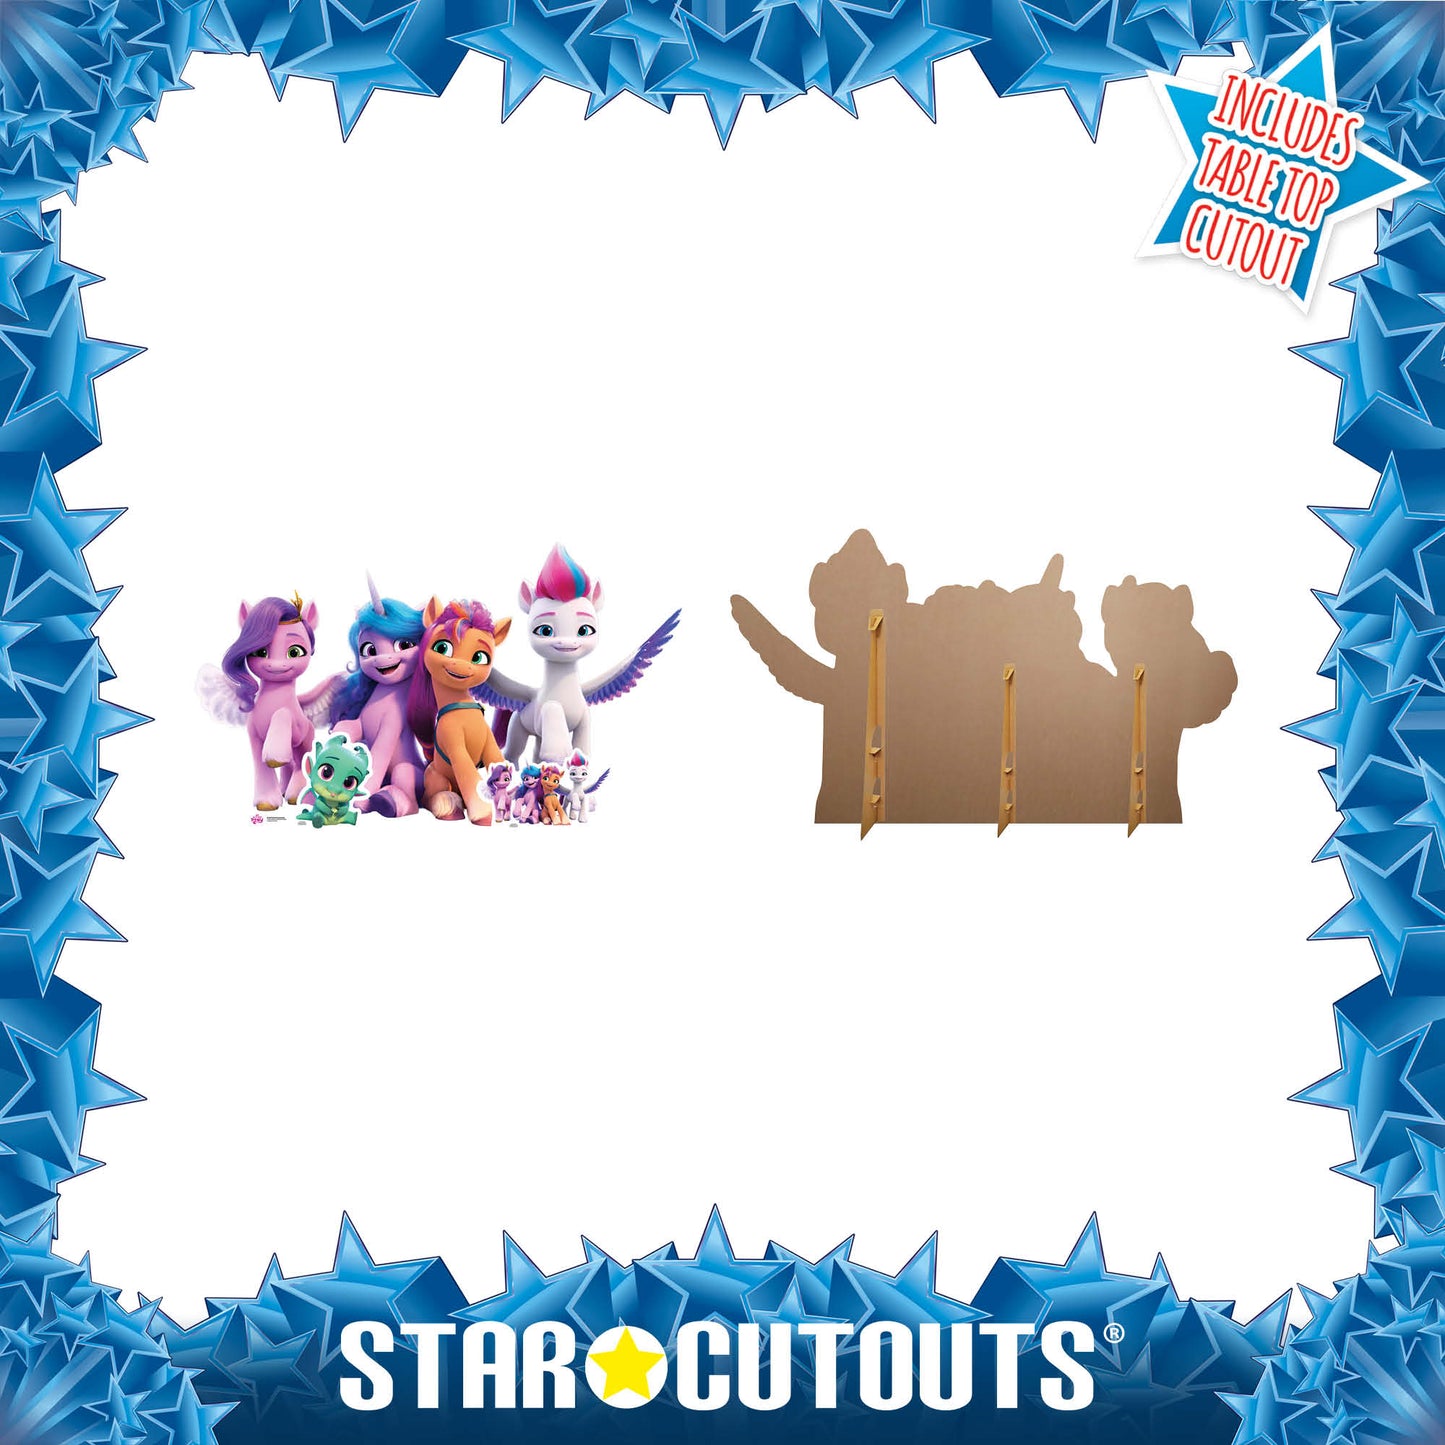 My Little Pony Group Large Cardboard Cutout